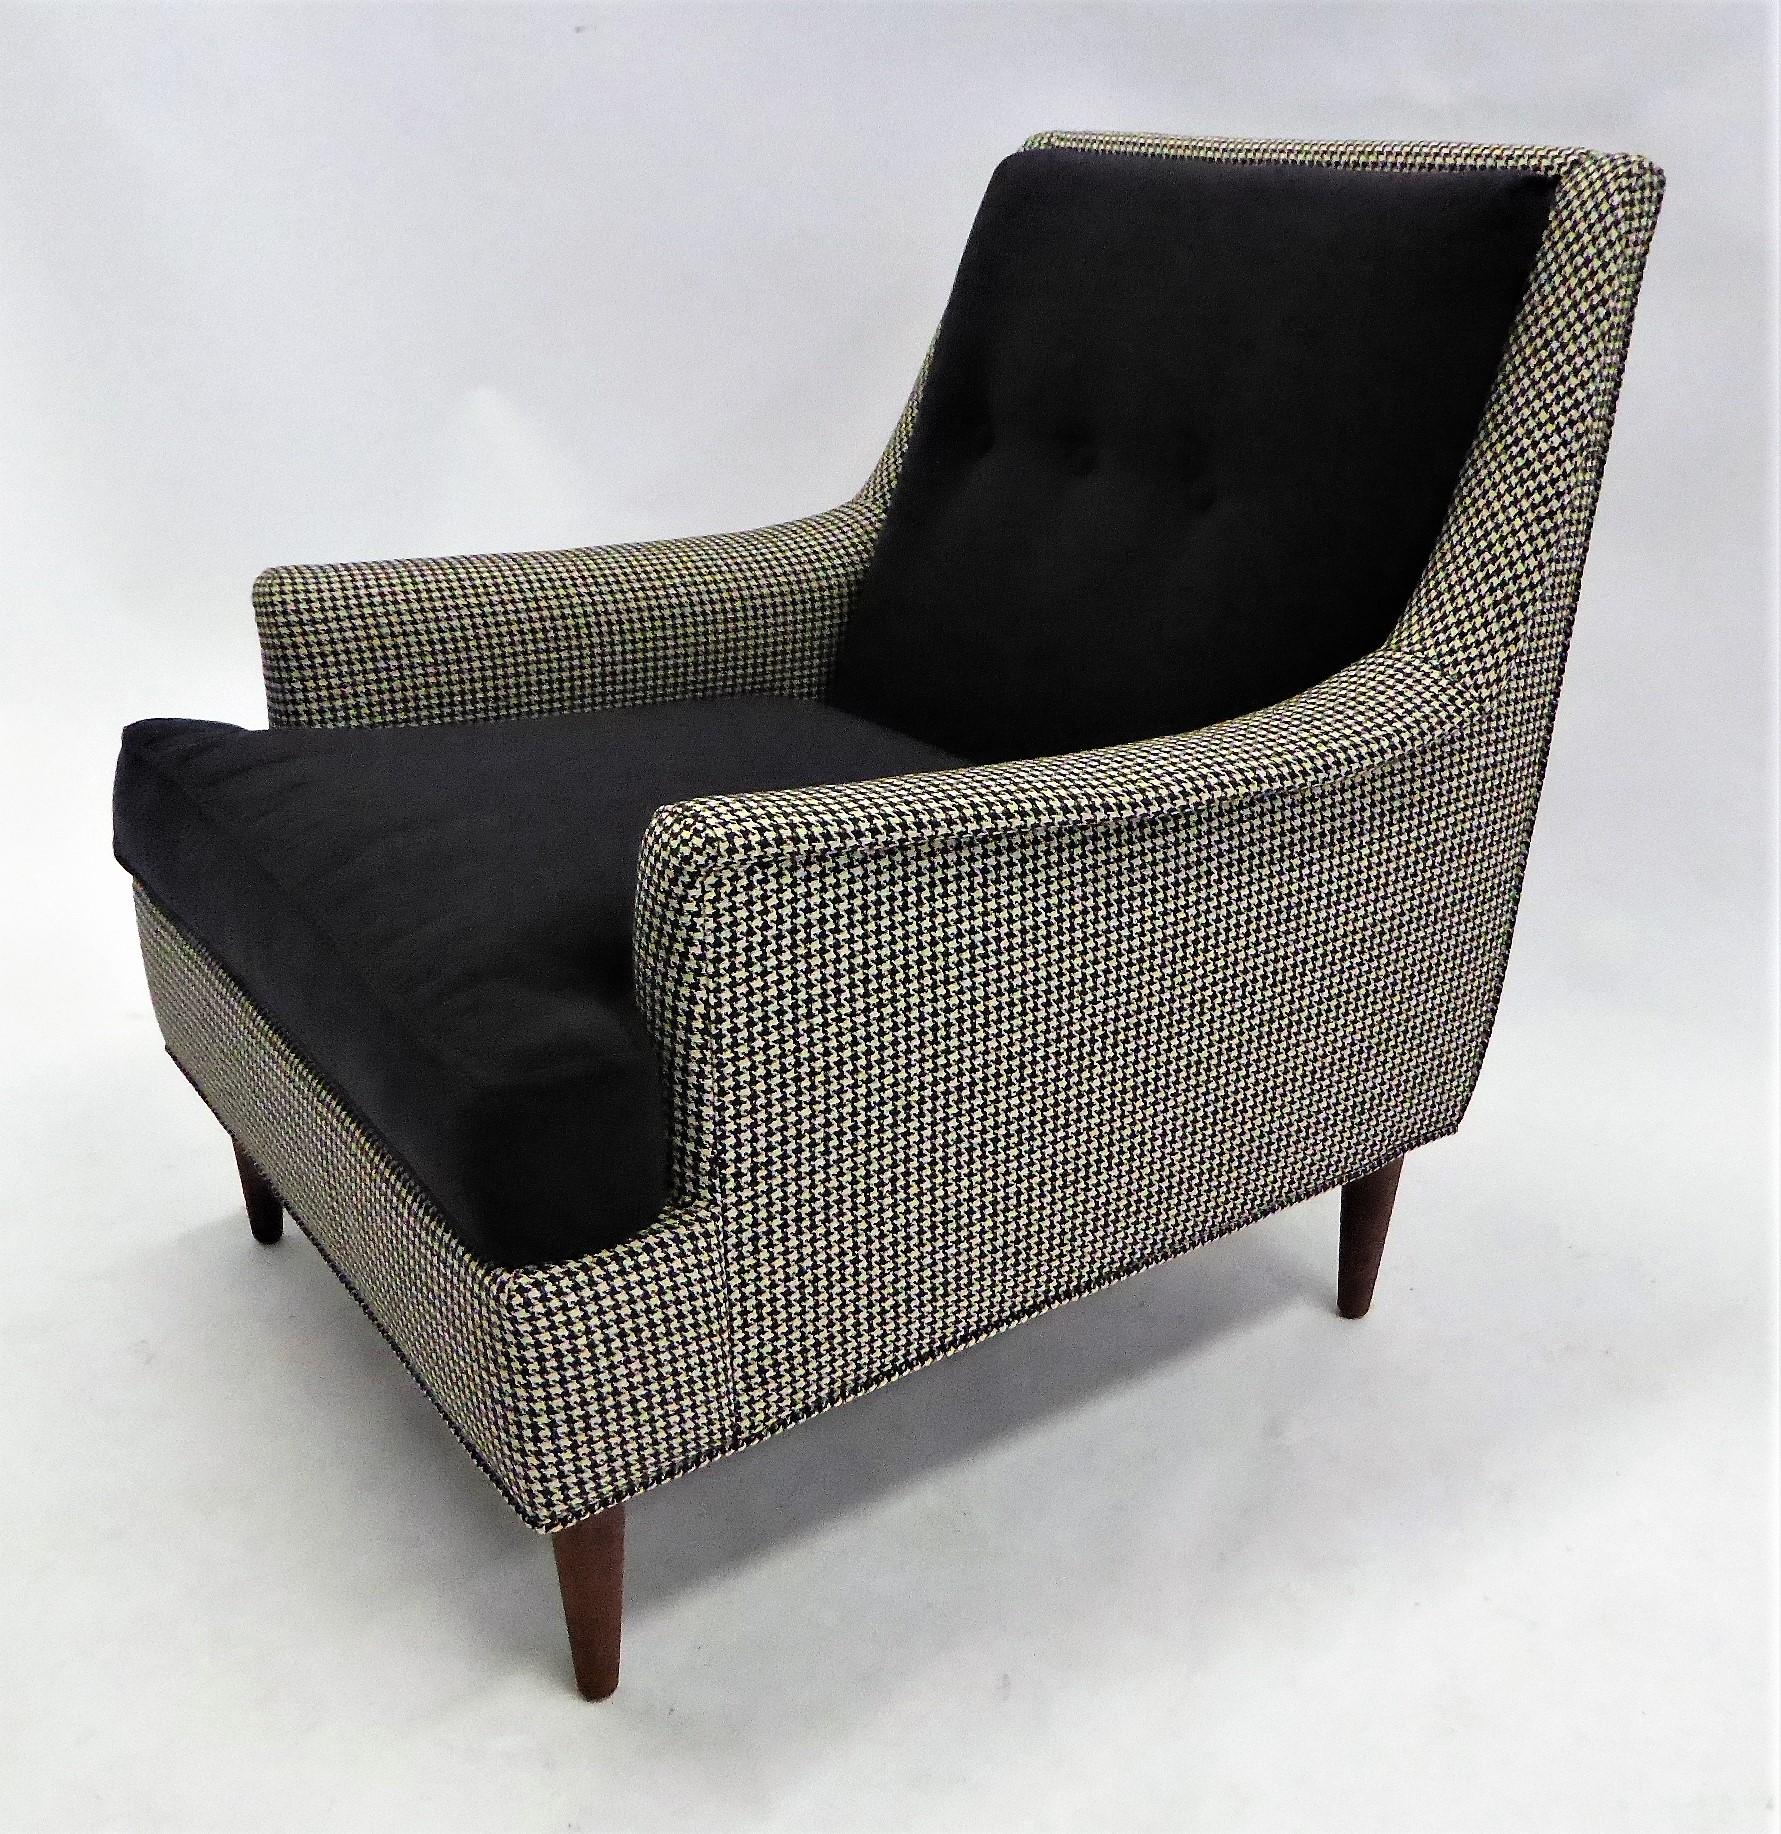 Inspired by the Zanuso lady chair, here a 1950s sleek armed lounge chair in black and white Houndstooth accented by Black Spenser Knoll fabric covered seat cushion and button tuft back. With mid-century modern tapering walnut legs and winged arms.